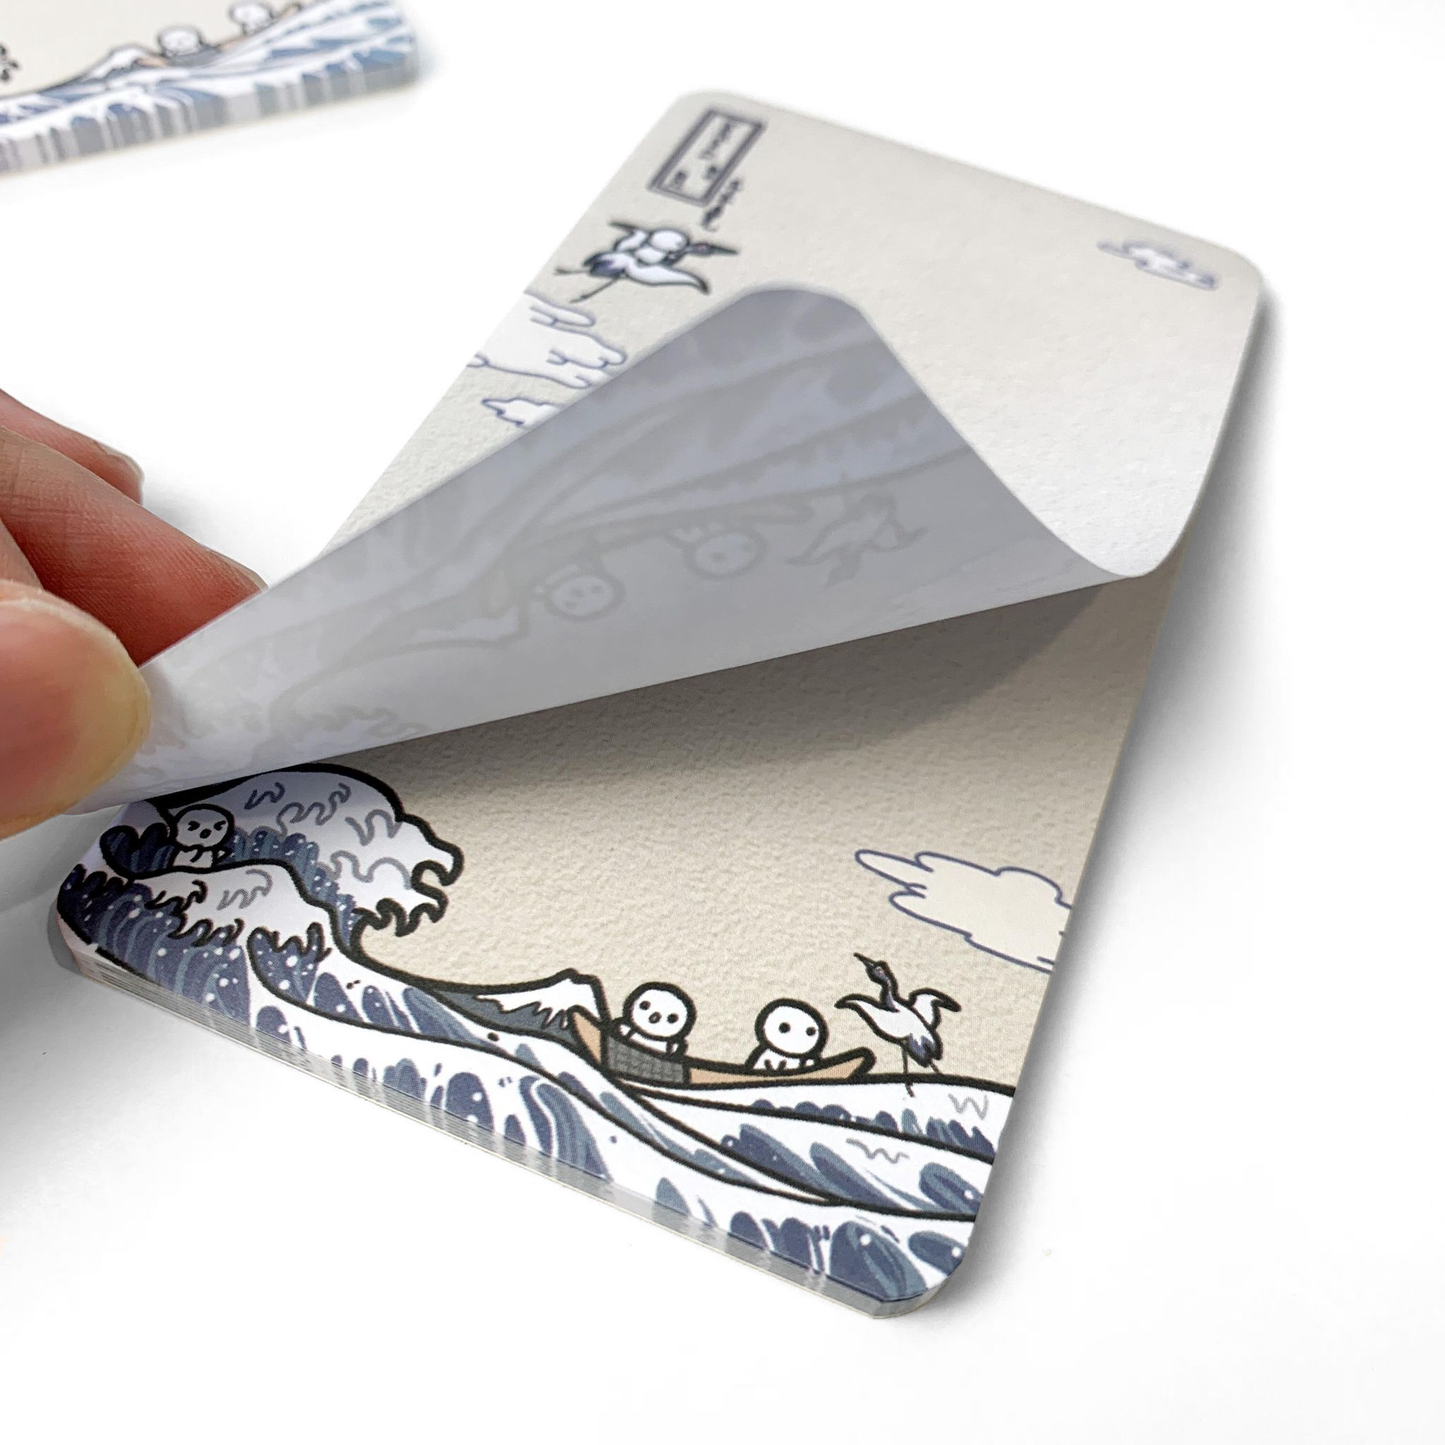 TCMC: Master Artists "The Great Wave" Notepad